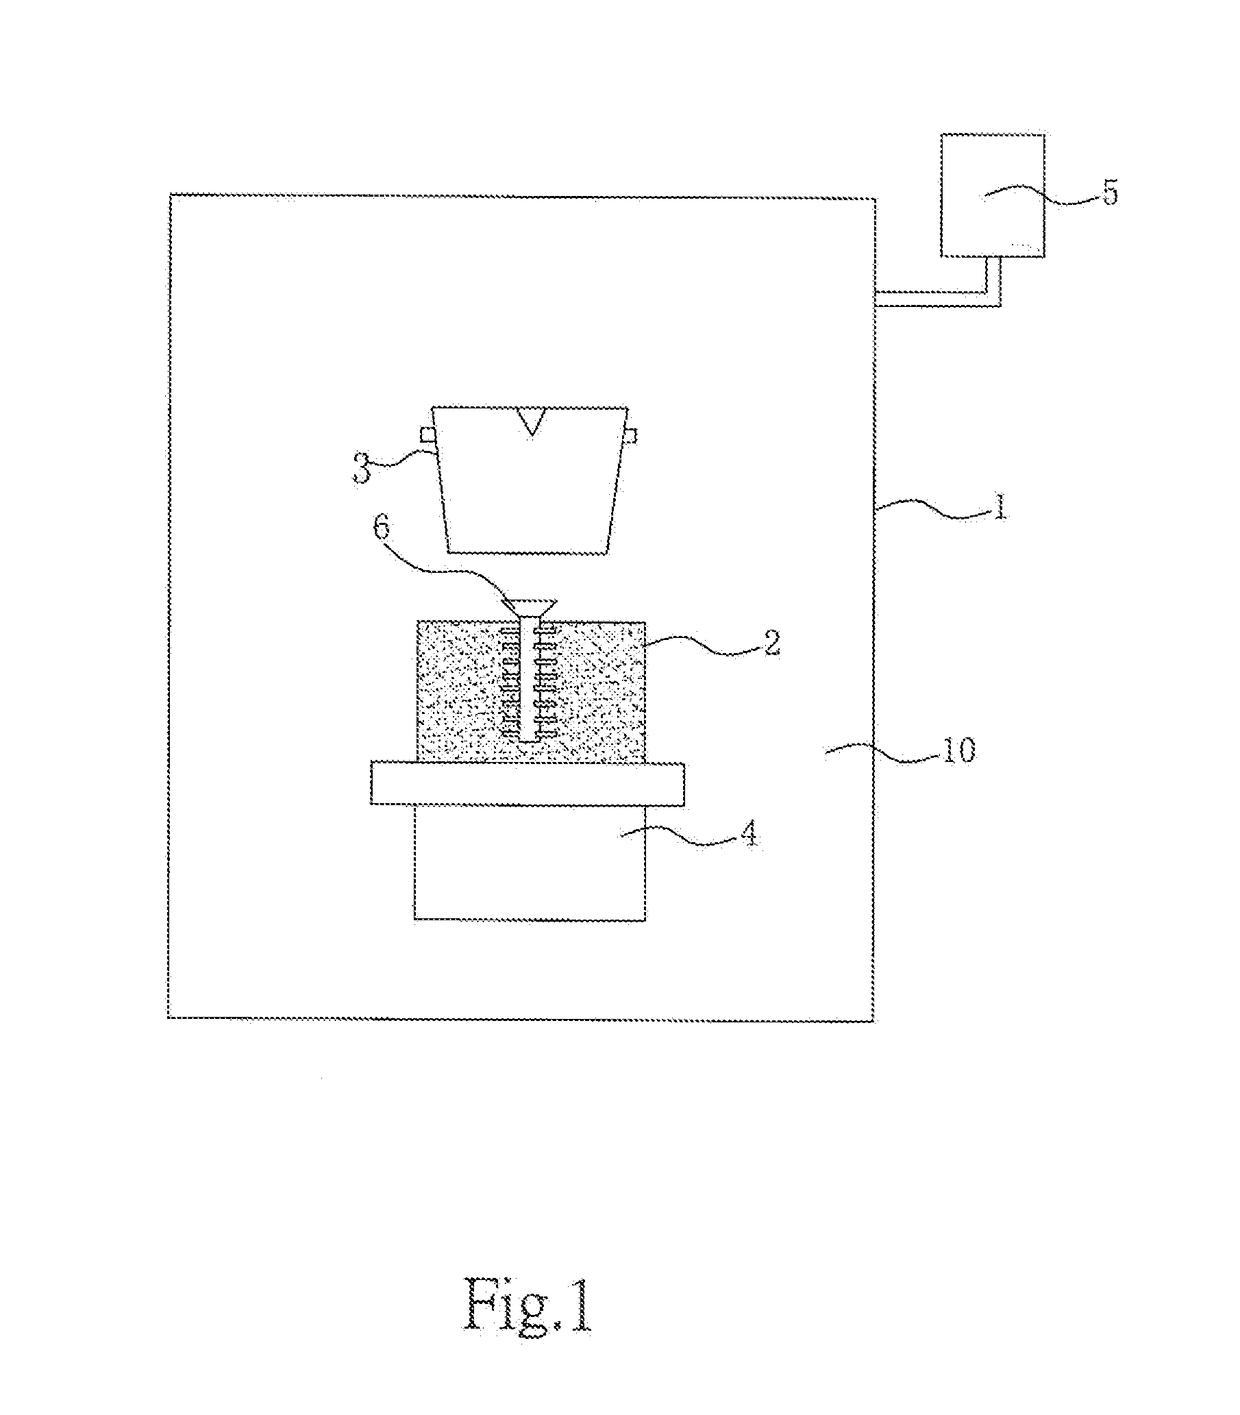 Casting method of using 3D printing to make shell mold and vacuum casting device for use in the casting method